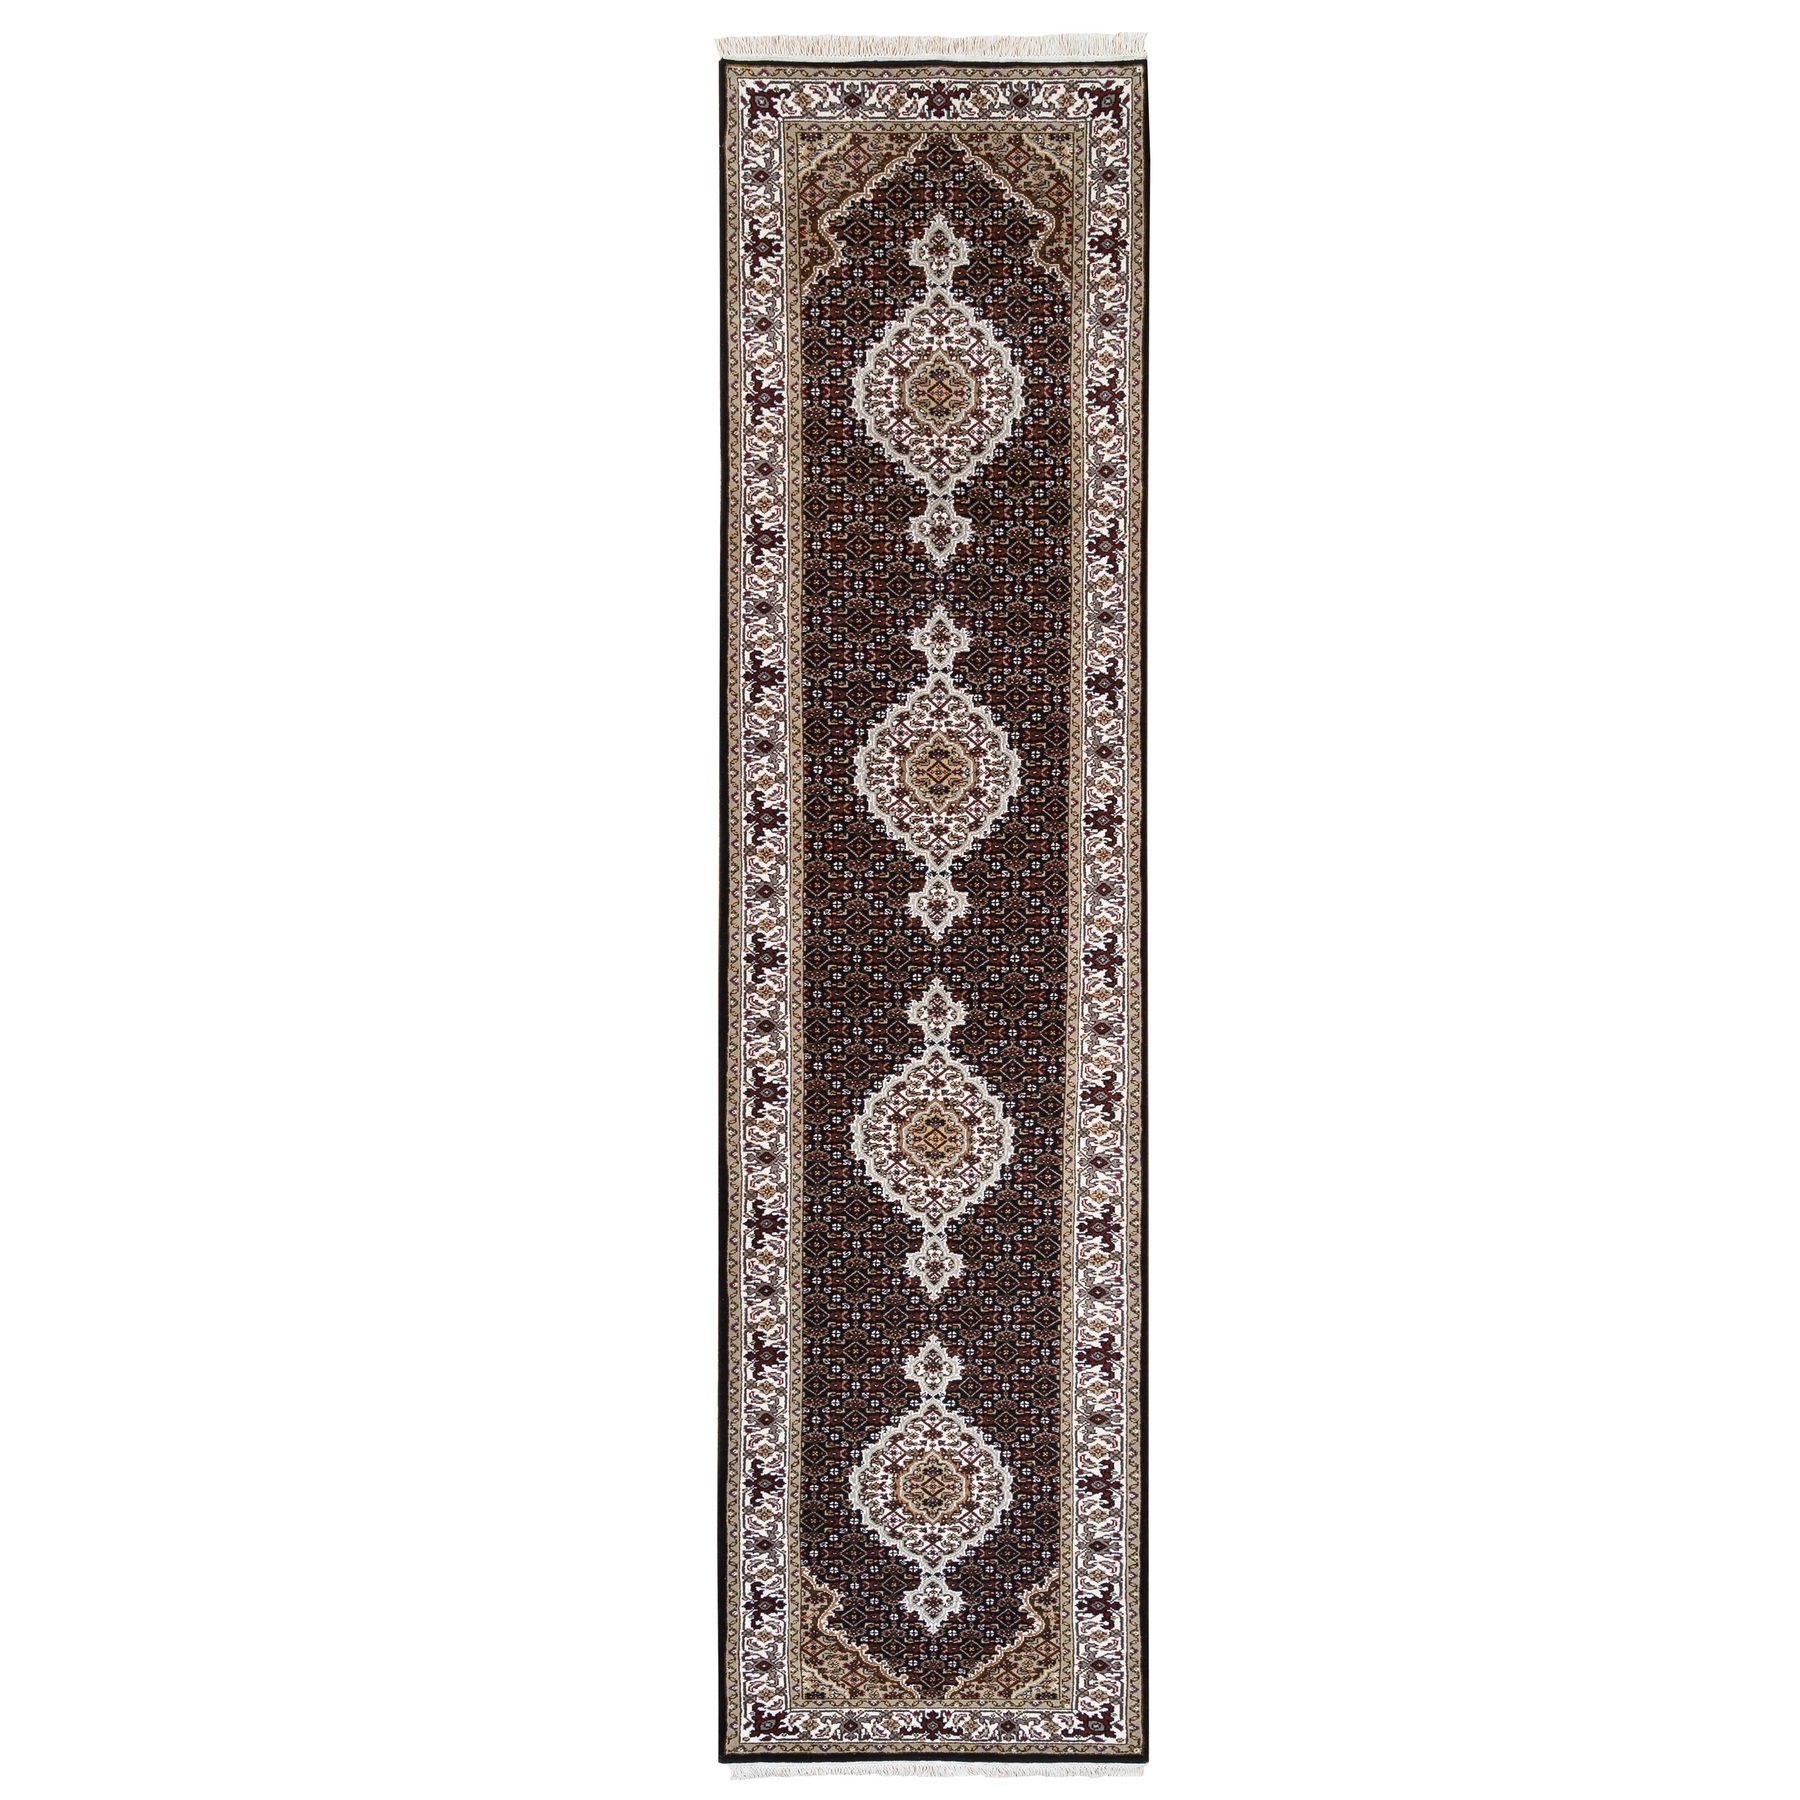 Pirniakan Collection Hand Knotted Black Rug No: 1125002